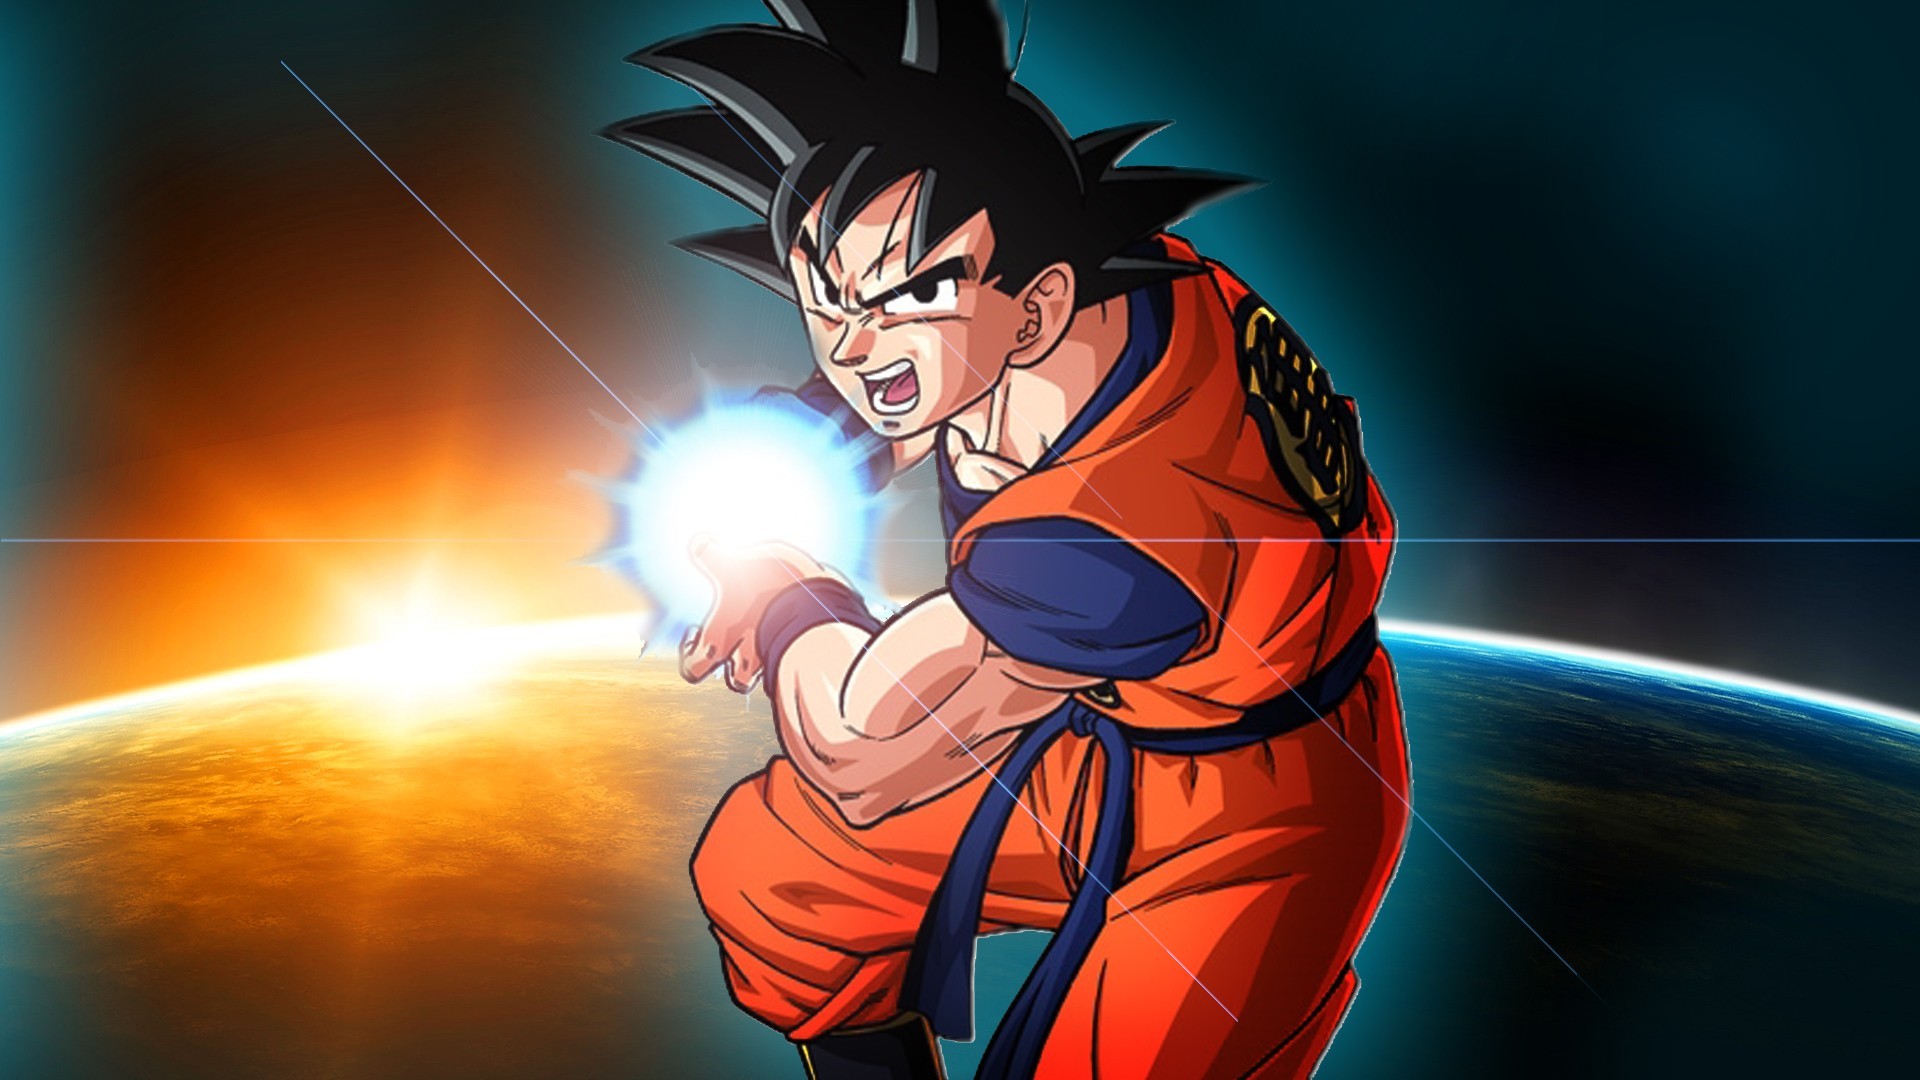 Kamehameha Dragon Ball Z Hd Socialphy Wallpapers Resolution Filesize kB, Added on May Tagged kamehameha